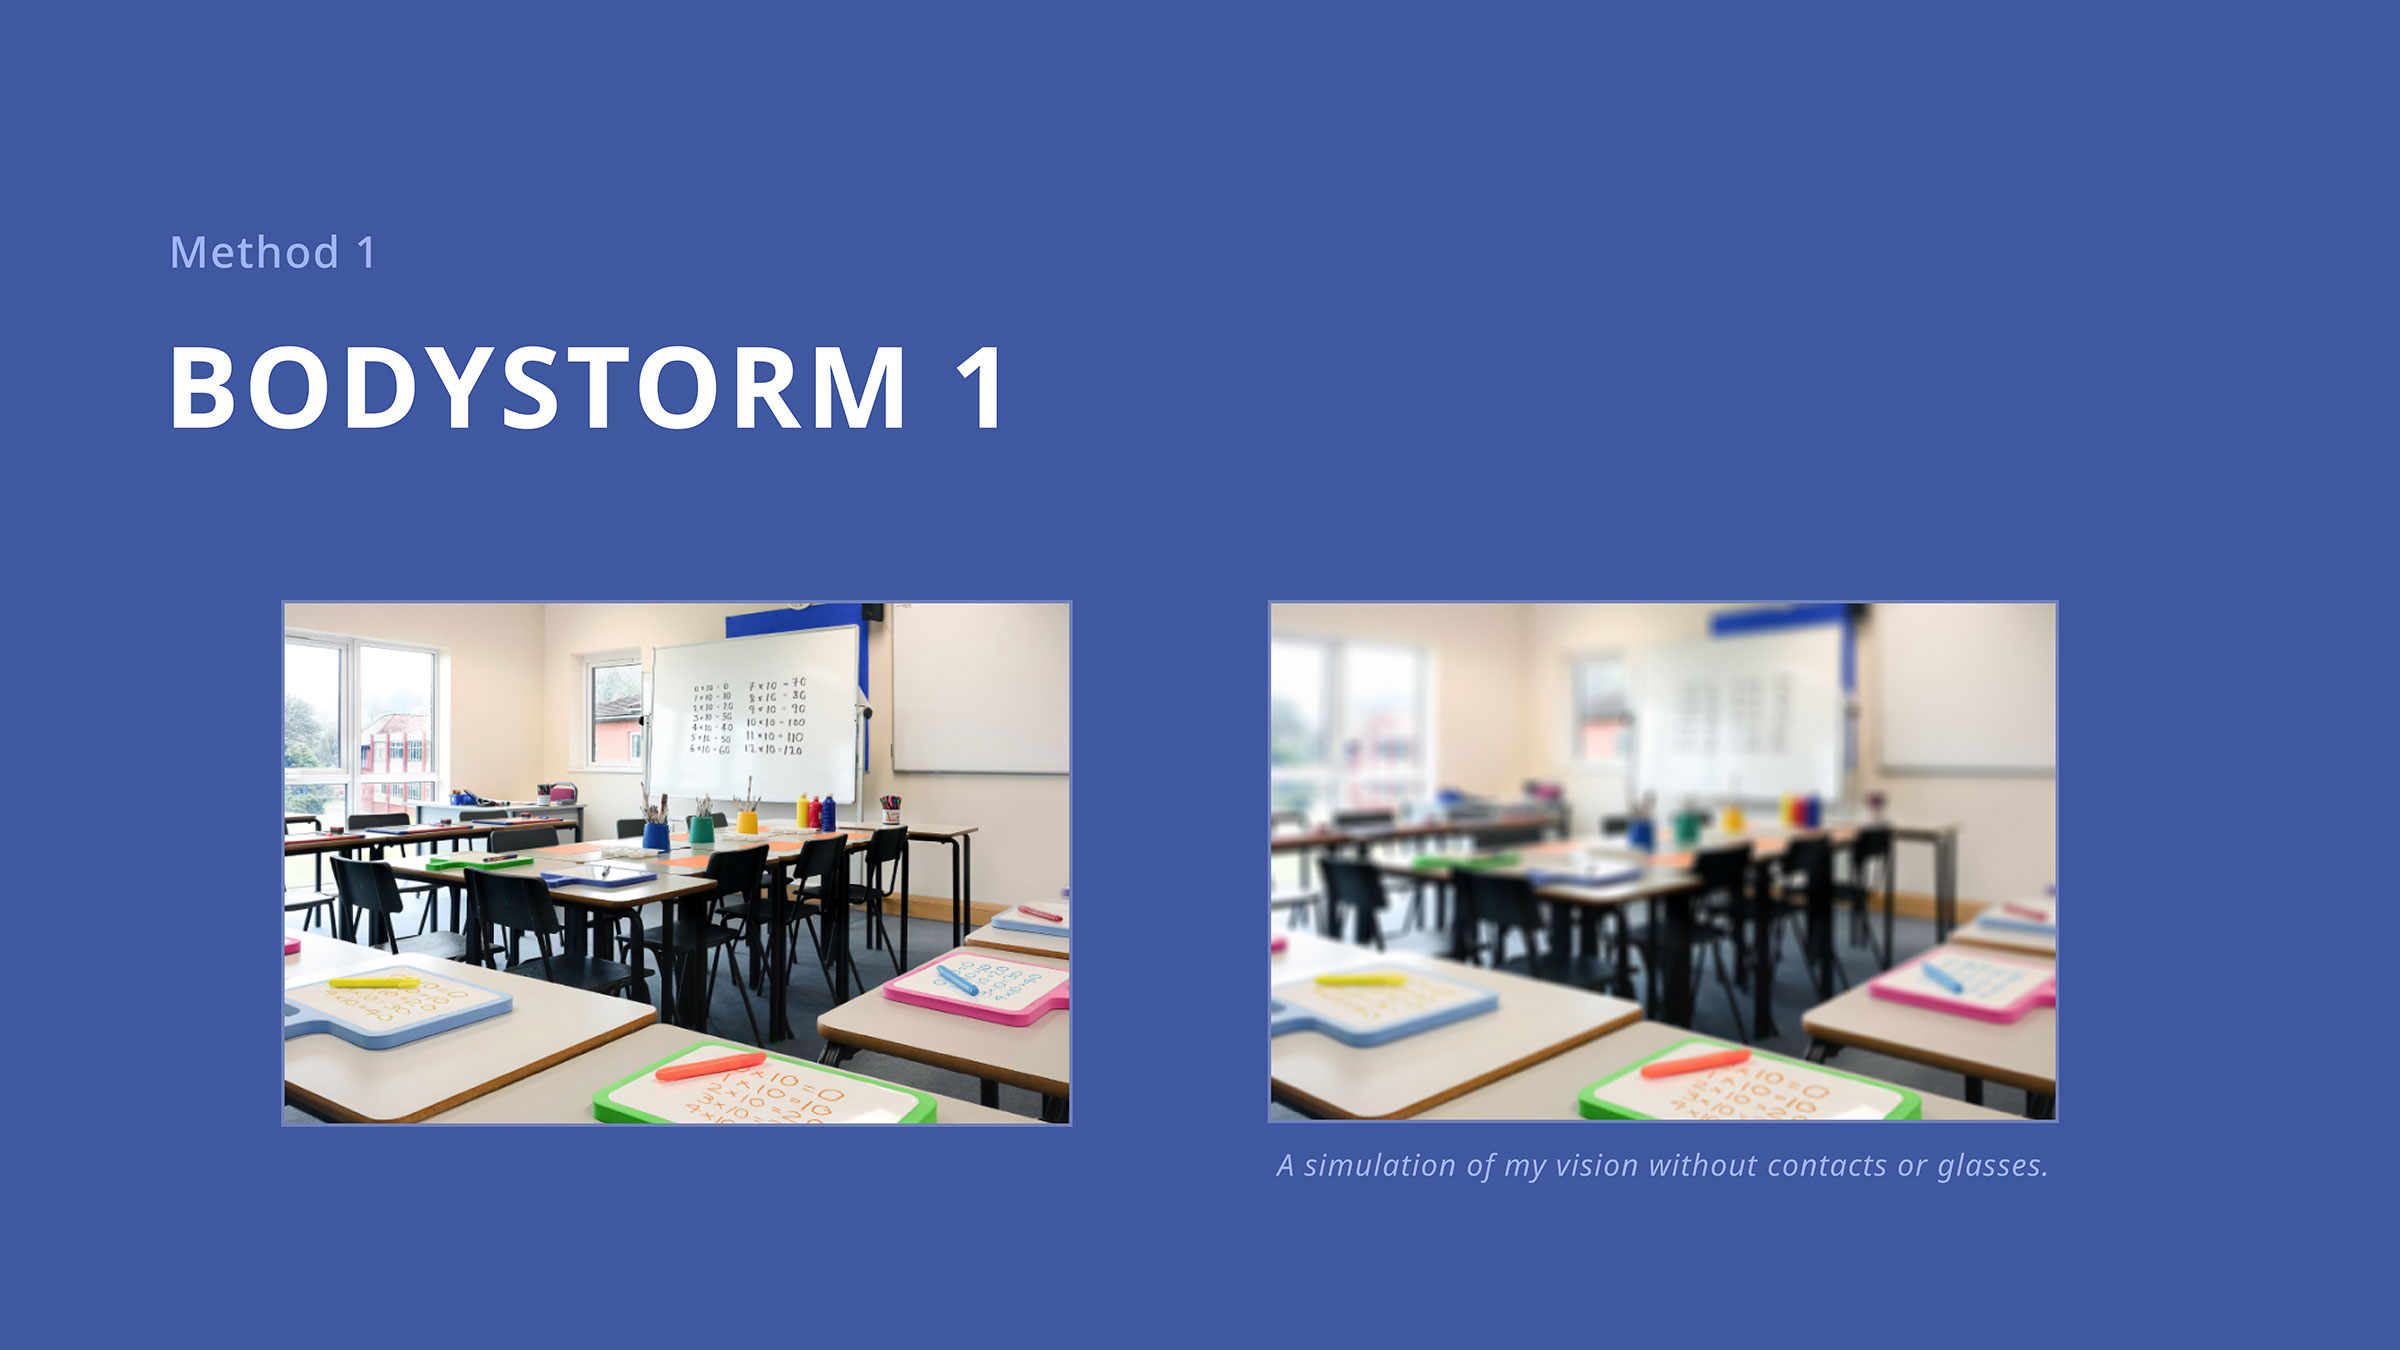 Method 1: Bodystorm. A comparison of 20-20 vision versus -3.00 vision is shown. Subtitle: A simulation of my vision without contacts or glasses.